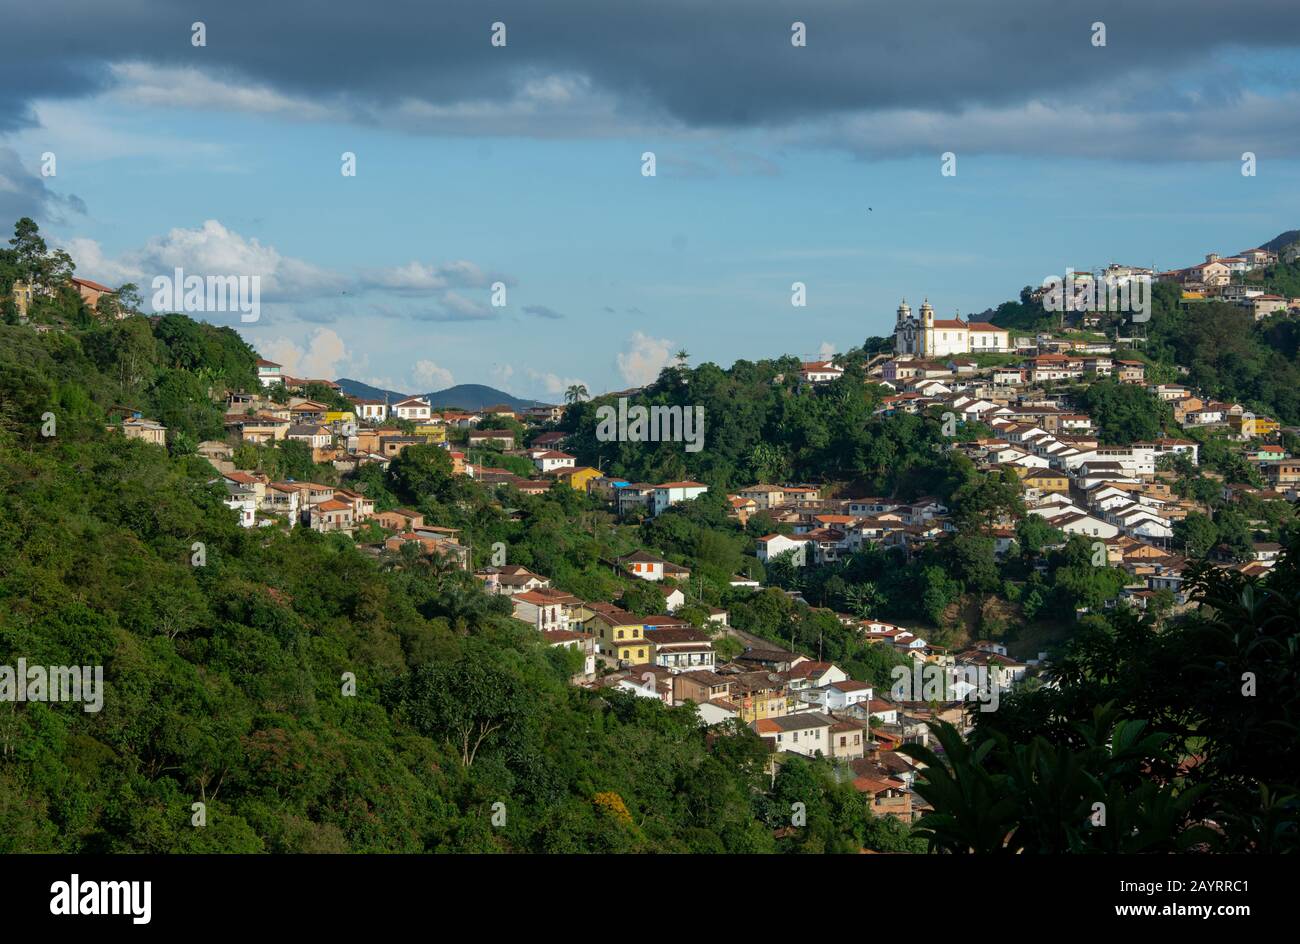 Cityscape of Ouro Preto city, Minas Gerais - Brazil. Ouro Preto was designed a World Heritage Site by UNESCO in 1980 because of its outstanding Baroqu Stock Photo